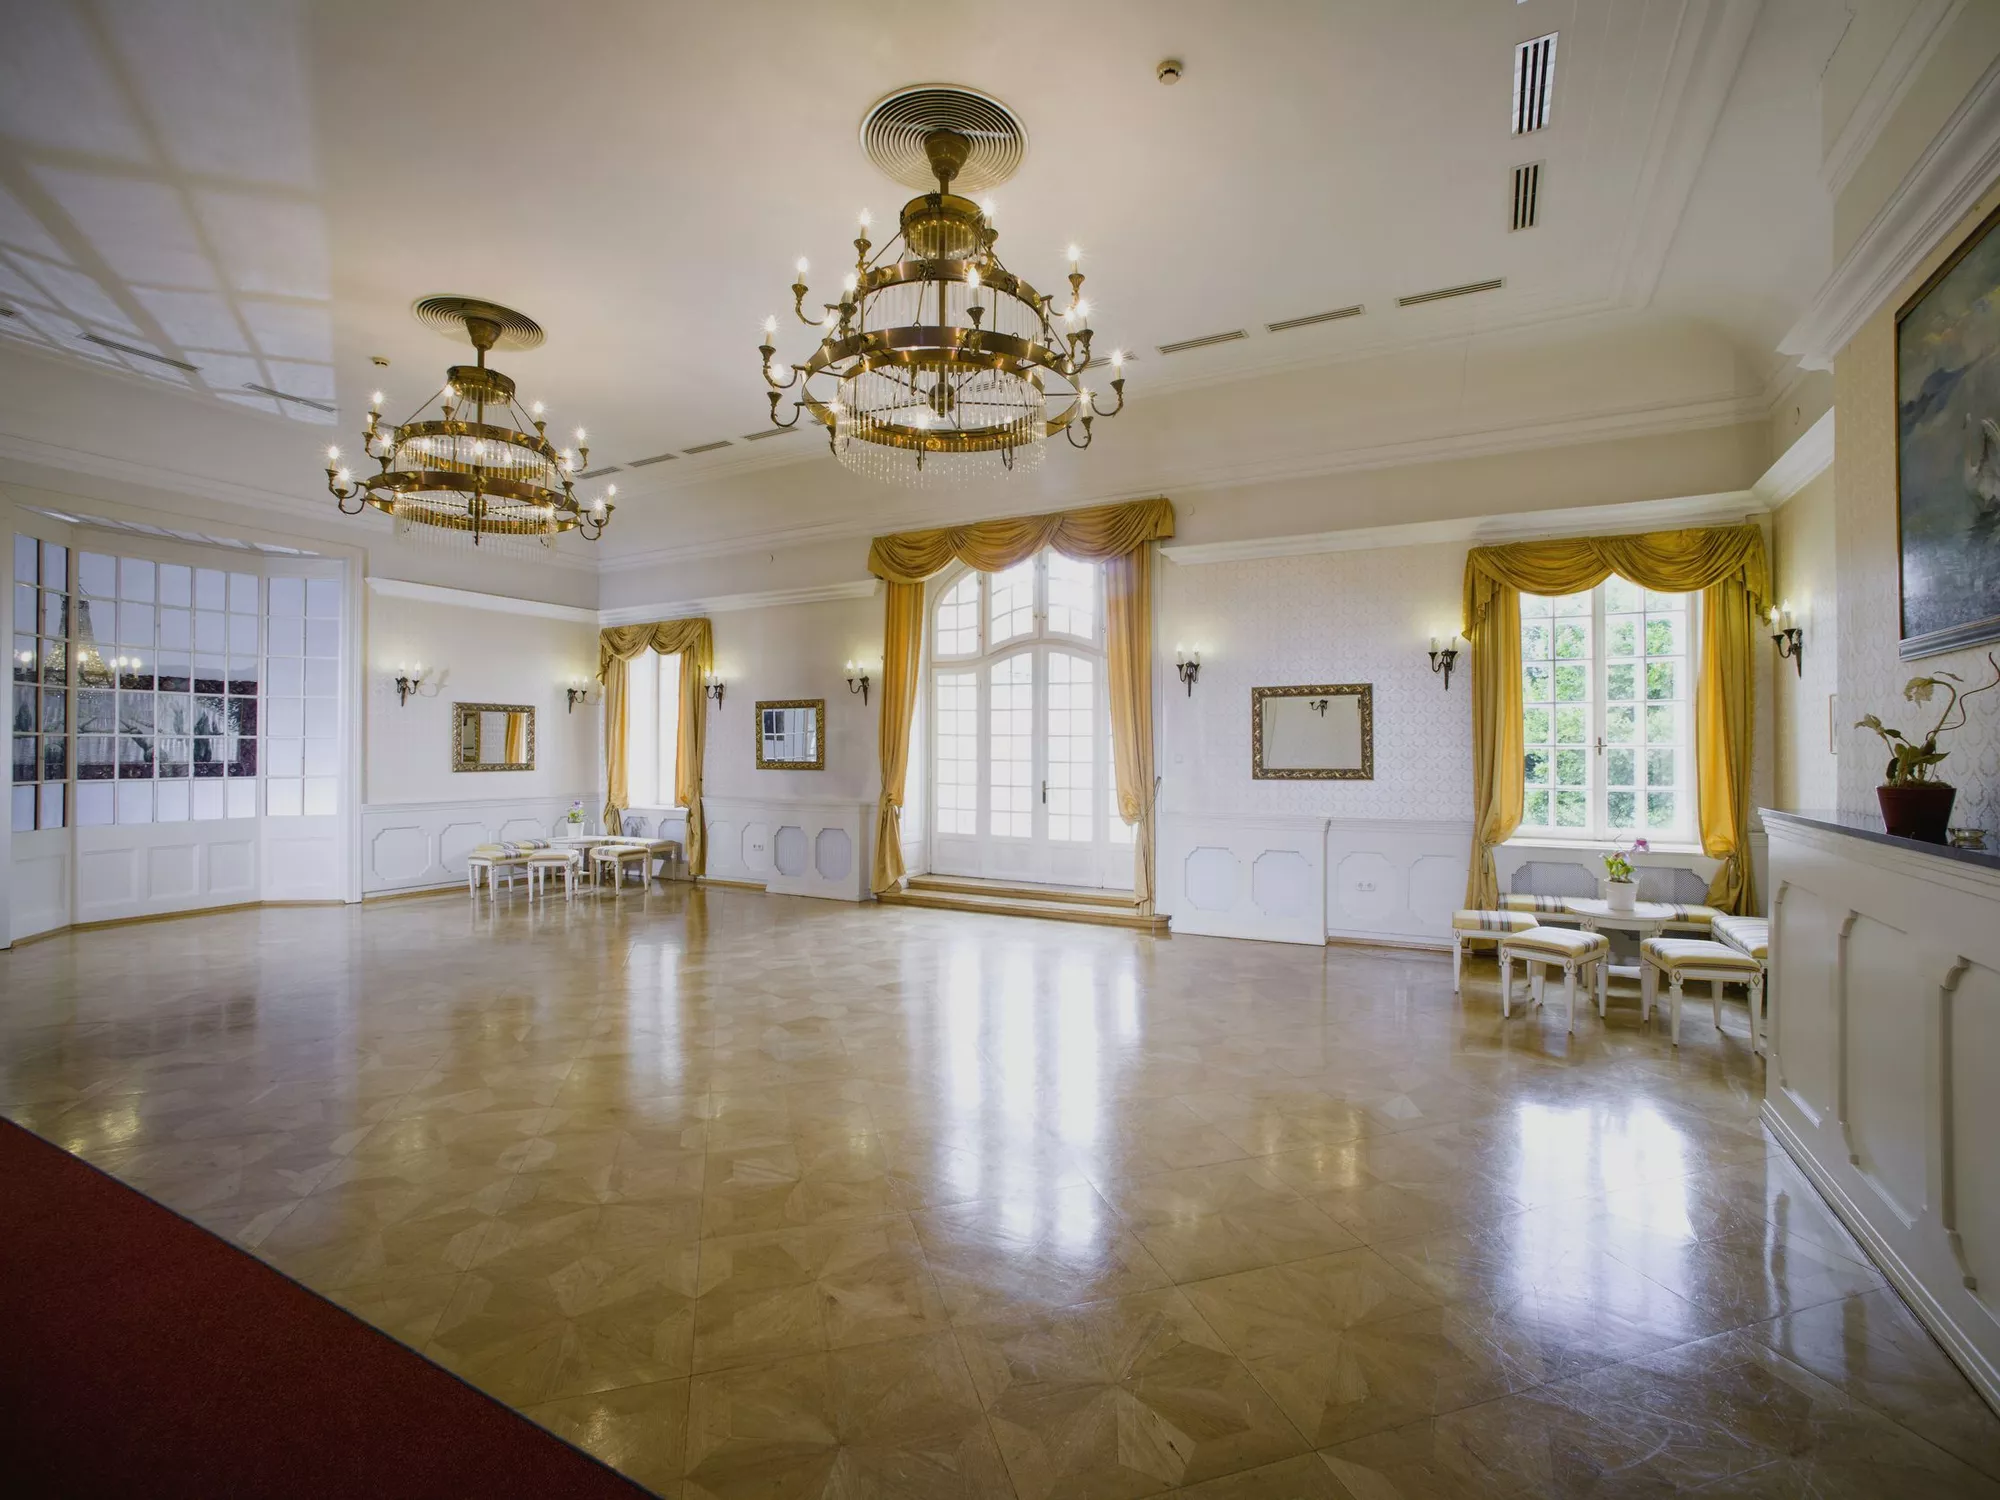 Ballroom with parquet flooring and chandeliers at Schlosshotel Szidonia in Western Hungary (c) photo Daniel Vegel